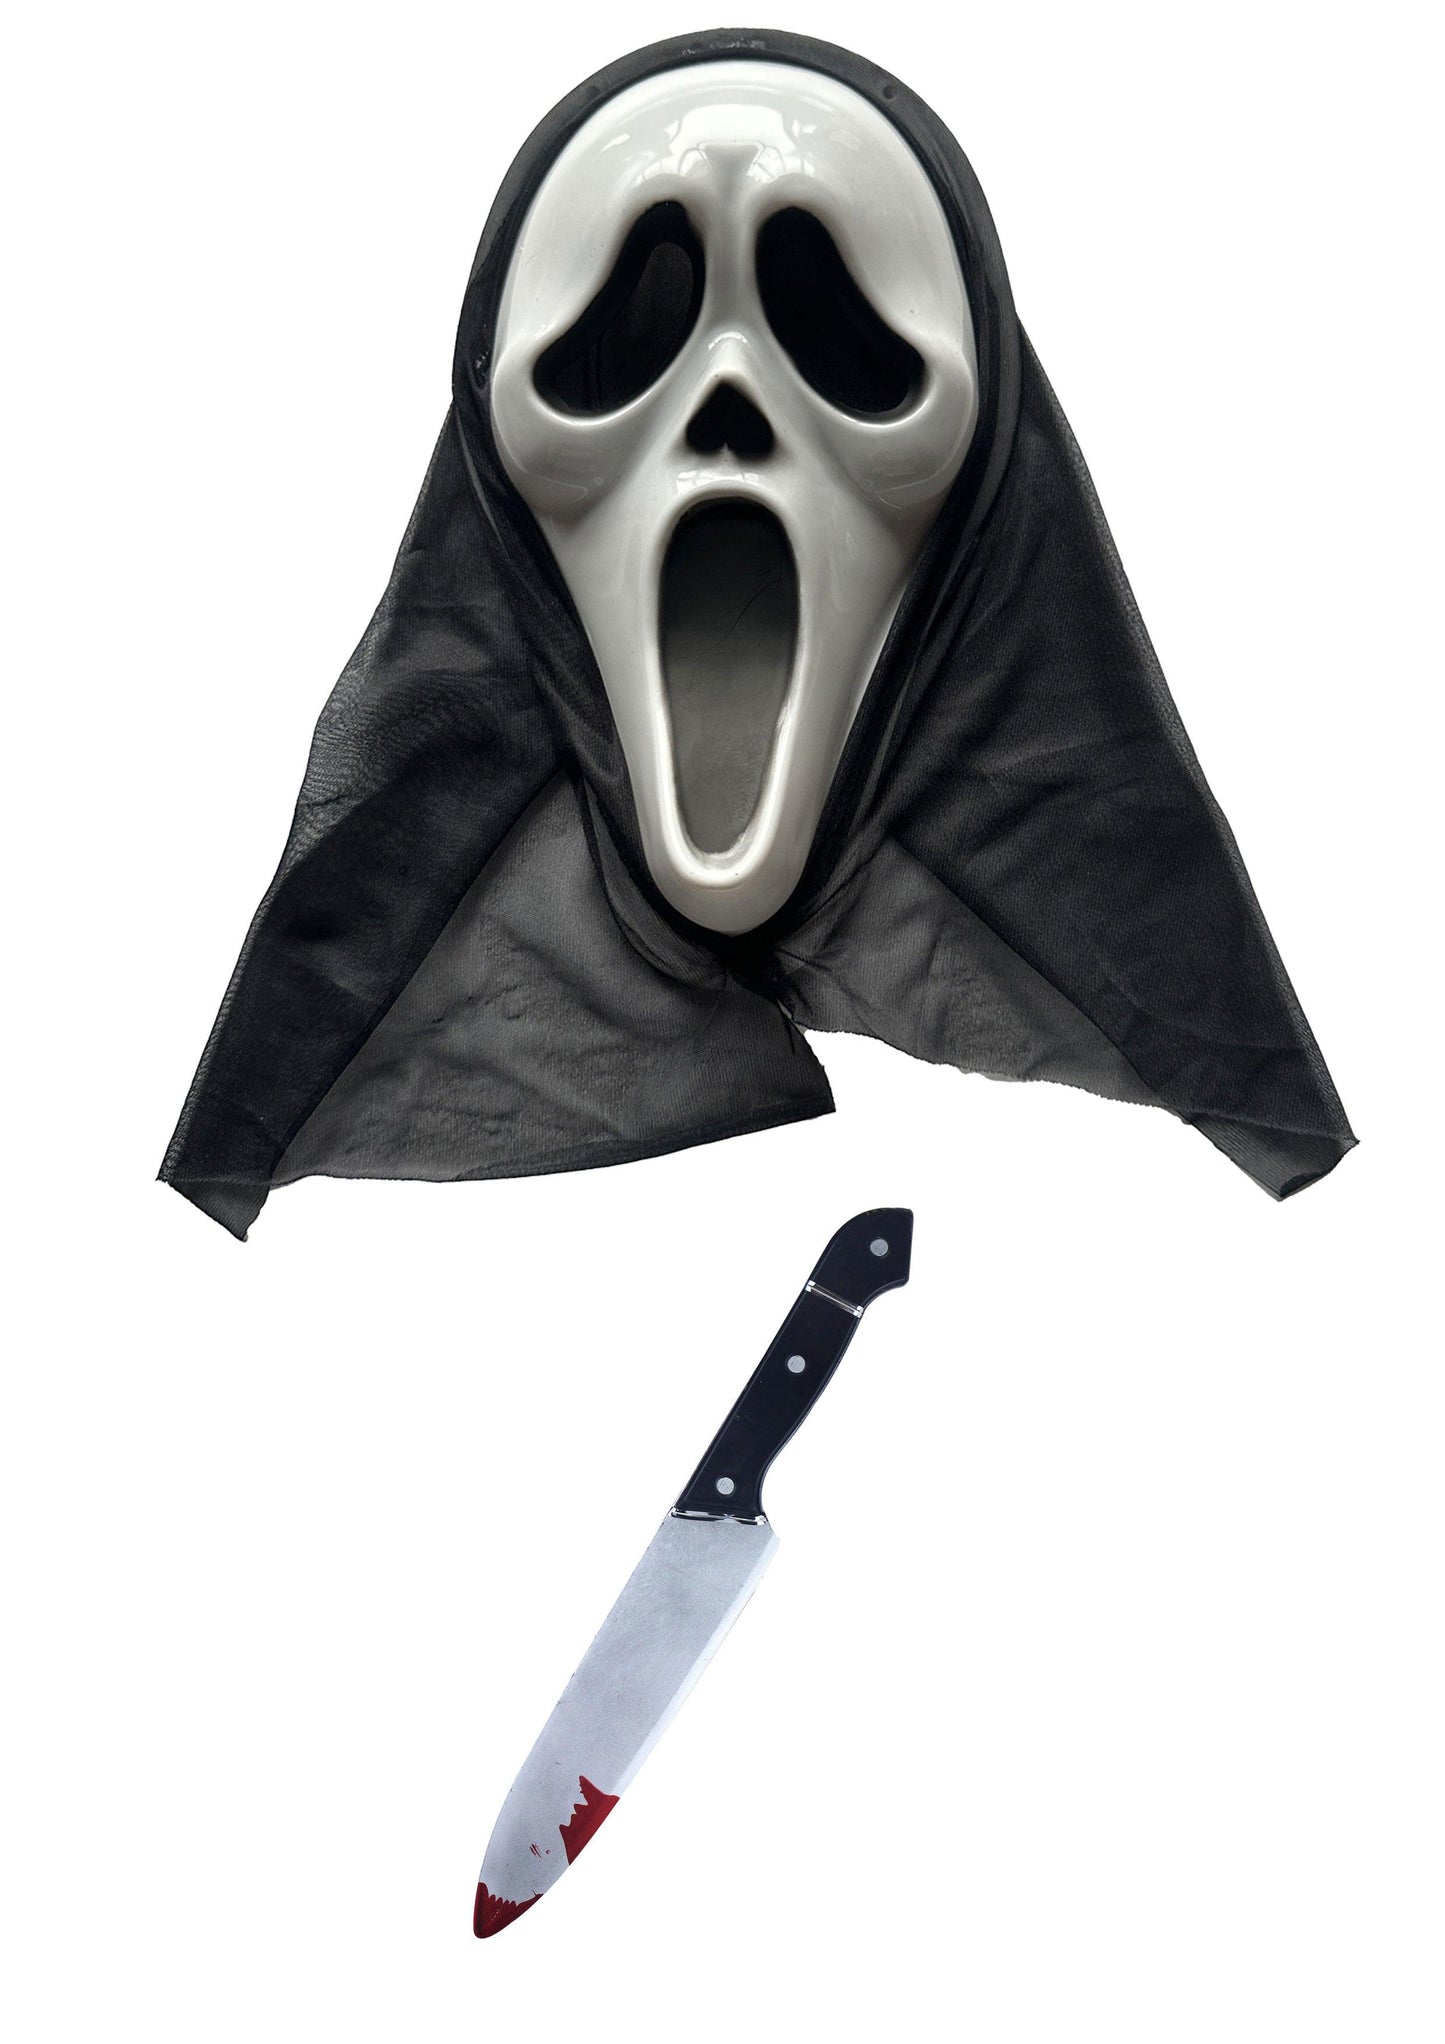 Ghost Killer Mask with Hood, Scream Mask, and 31cm Fake Blooded Knife Prop - Halloween Horror Costume Set - Labreeze